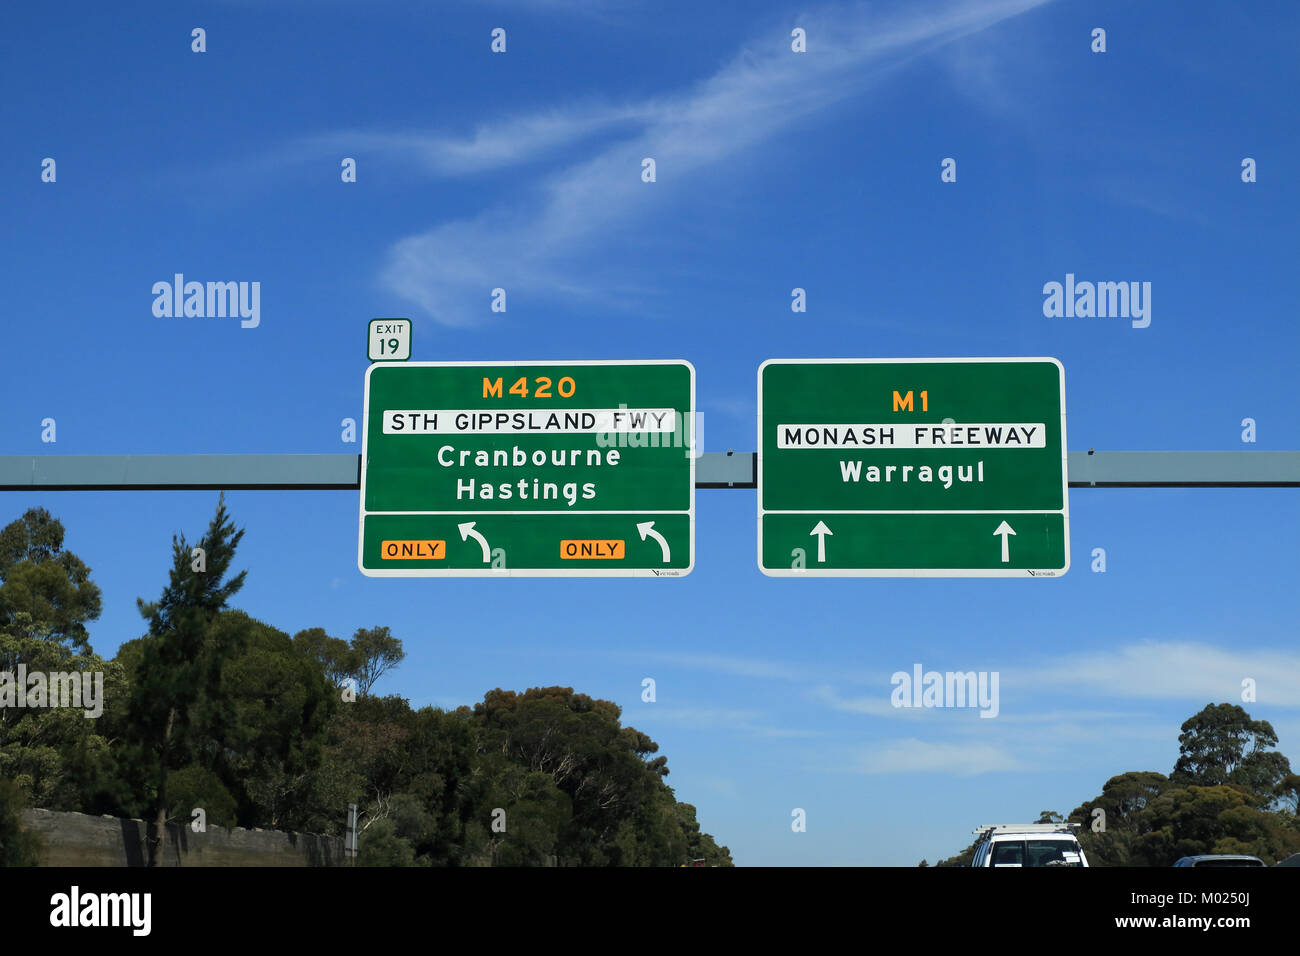 Monash freeway and South Gippsland Freeway signboards on Melbourne freeway road signs Stock Photo